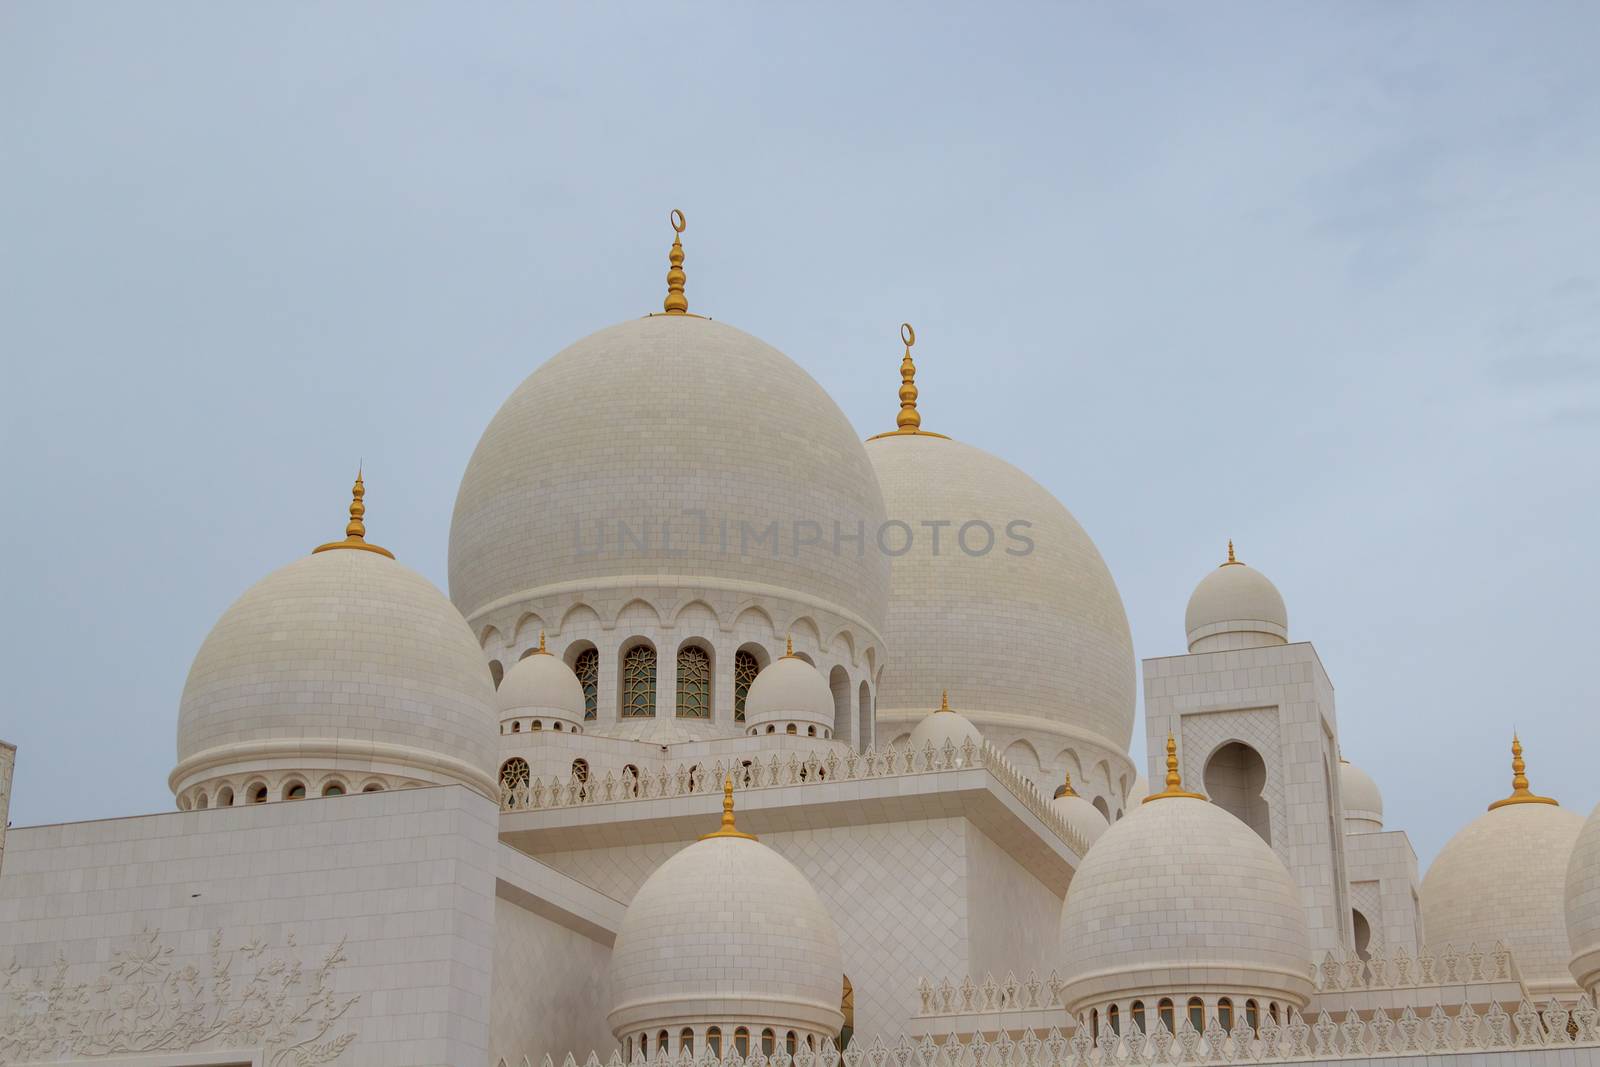 Abu Dhabi, UAE - CIRCA 2020:Sheikh Zayed Grand Mosque in Abu Dhabi, exterior view during the sunset located at the capital city of United Arab Emirates. The beautiful and largest mosque in Middle East